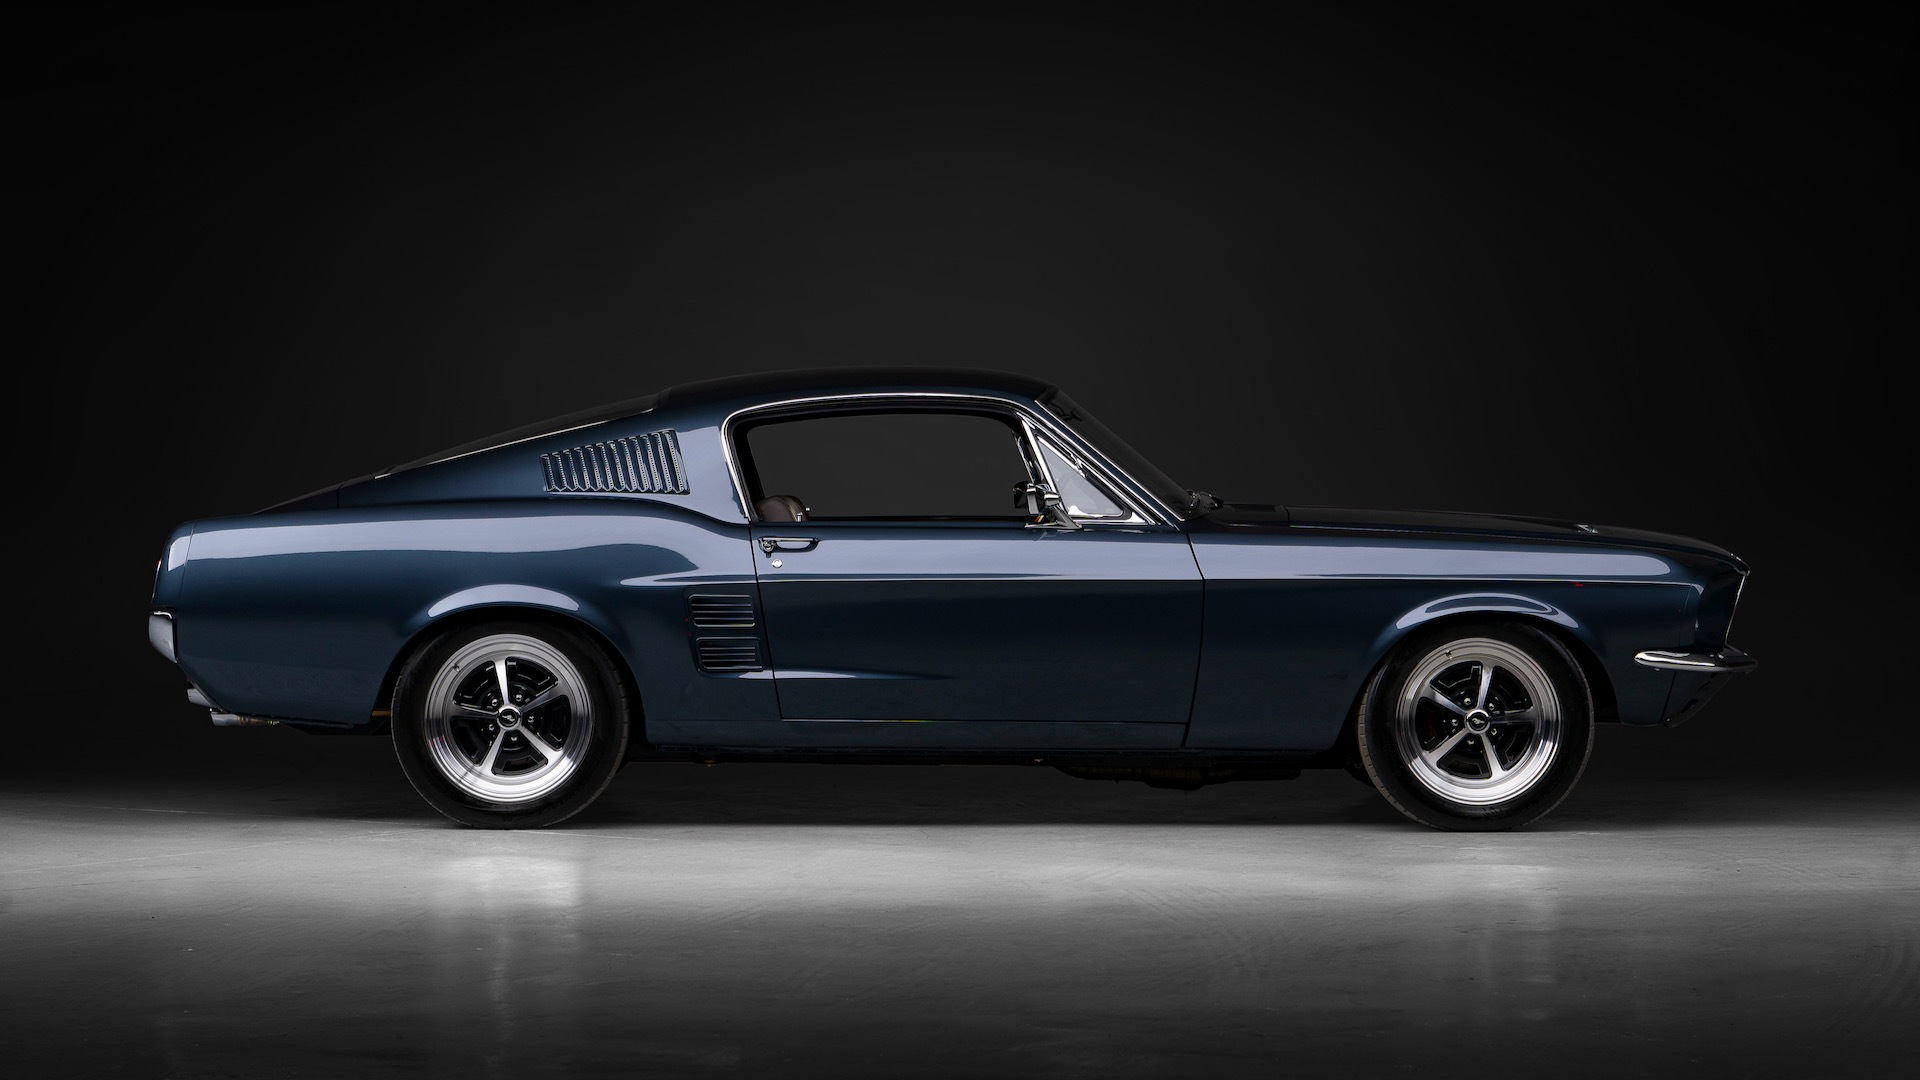 Ford Mustang fastback by Velocity Modern Classics